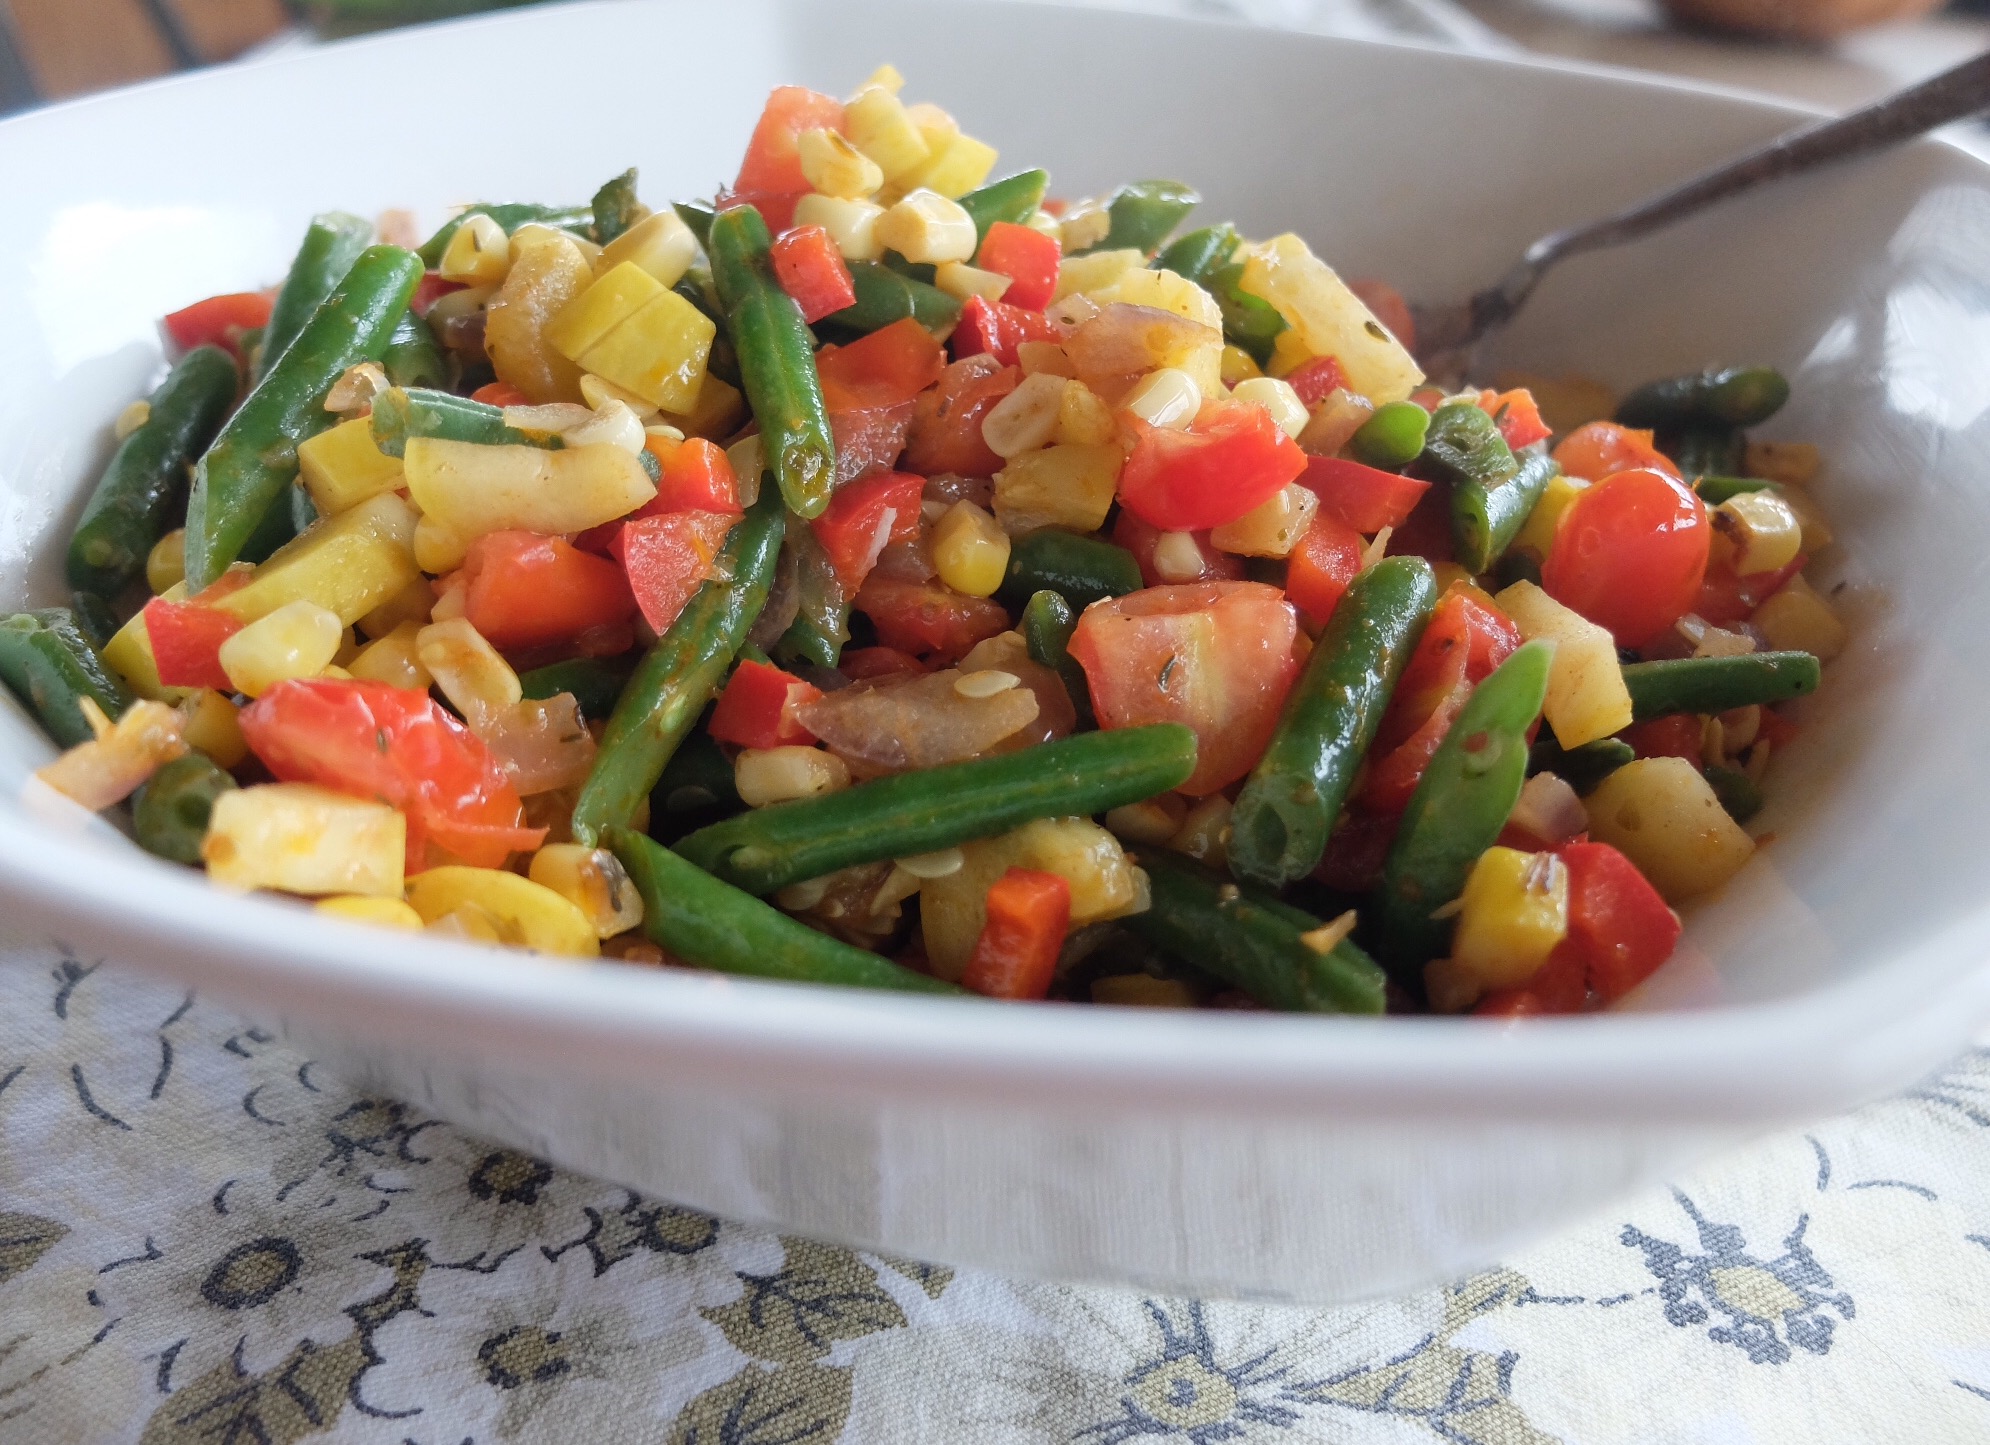 Enjoy this recipe as summer veggies come in at their freshest!